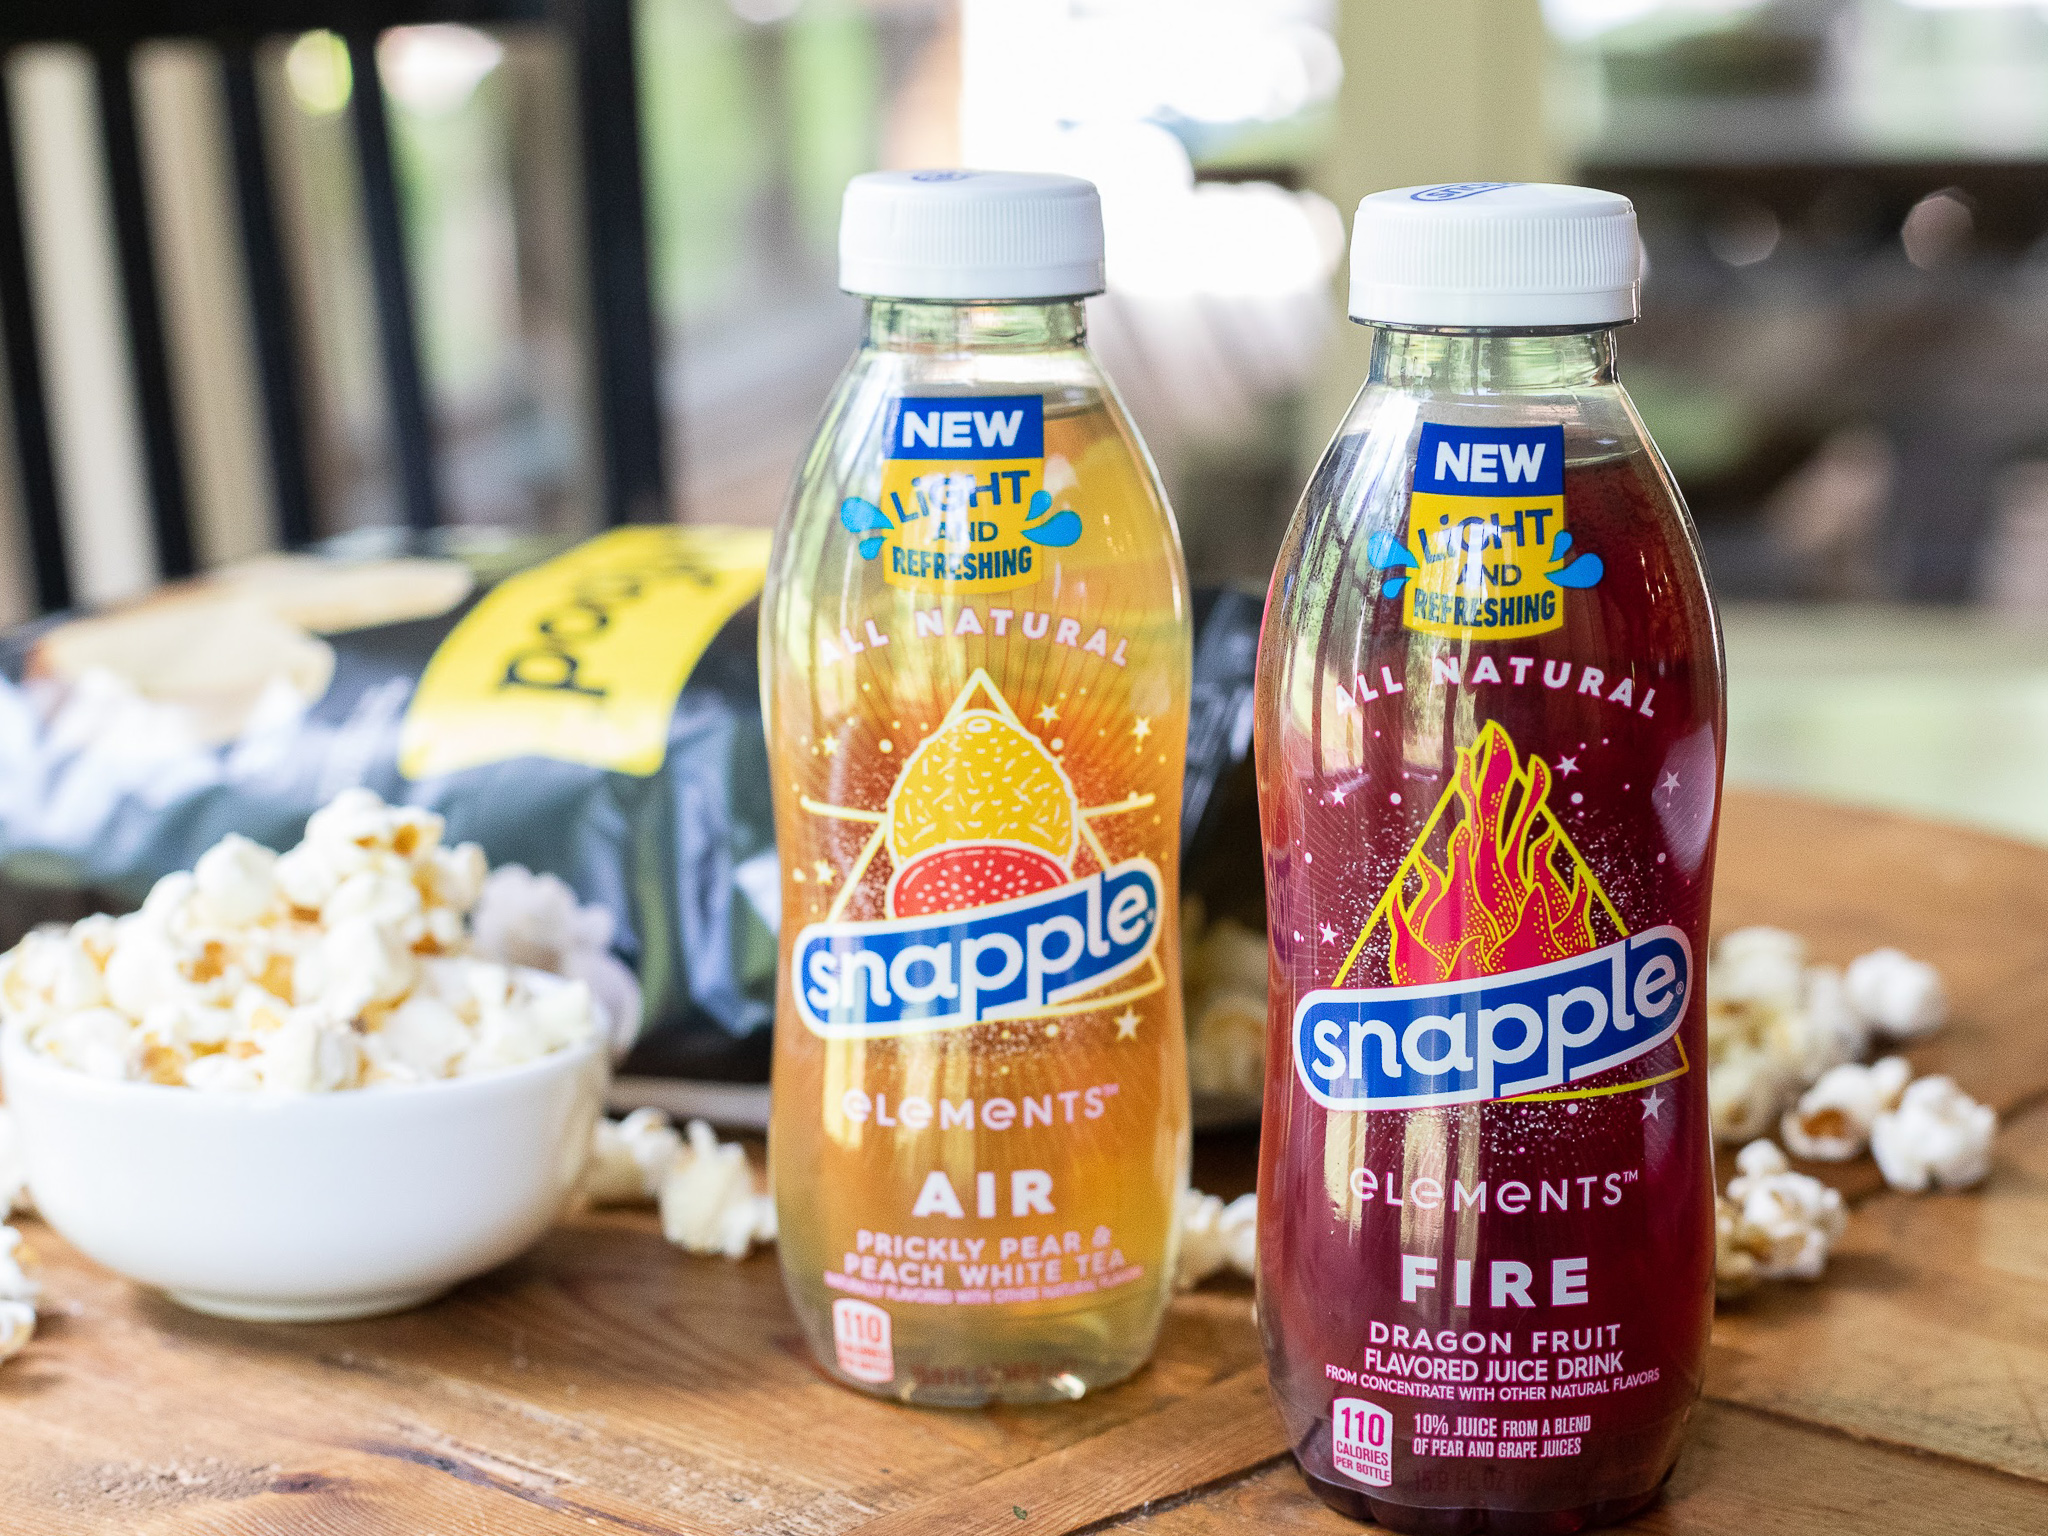 Grab A Discount On Snapple Elements At Publix – Just 75¢ Per Bottle